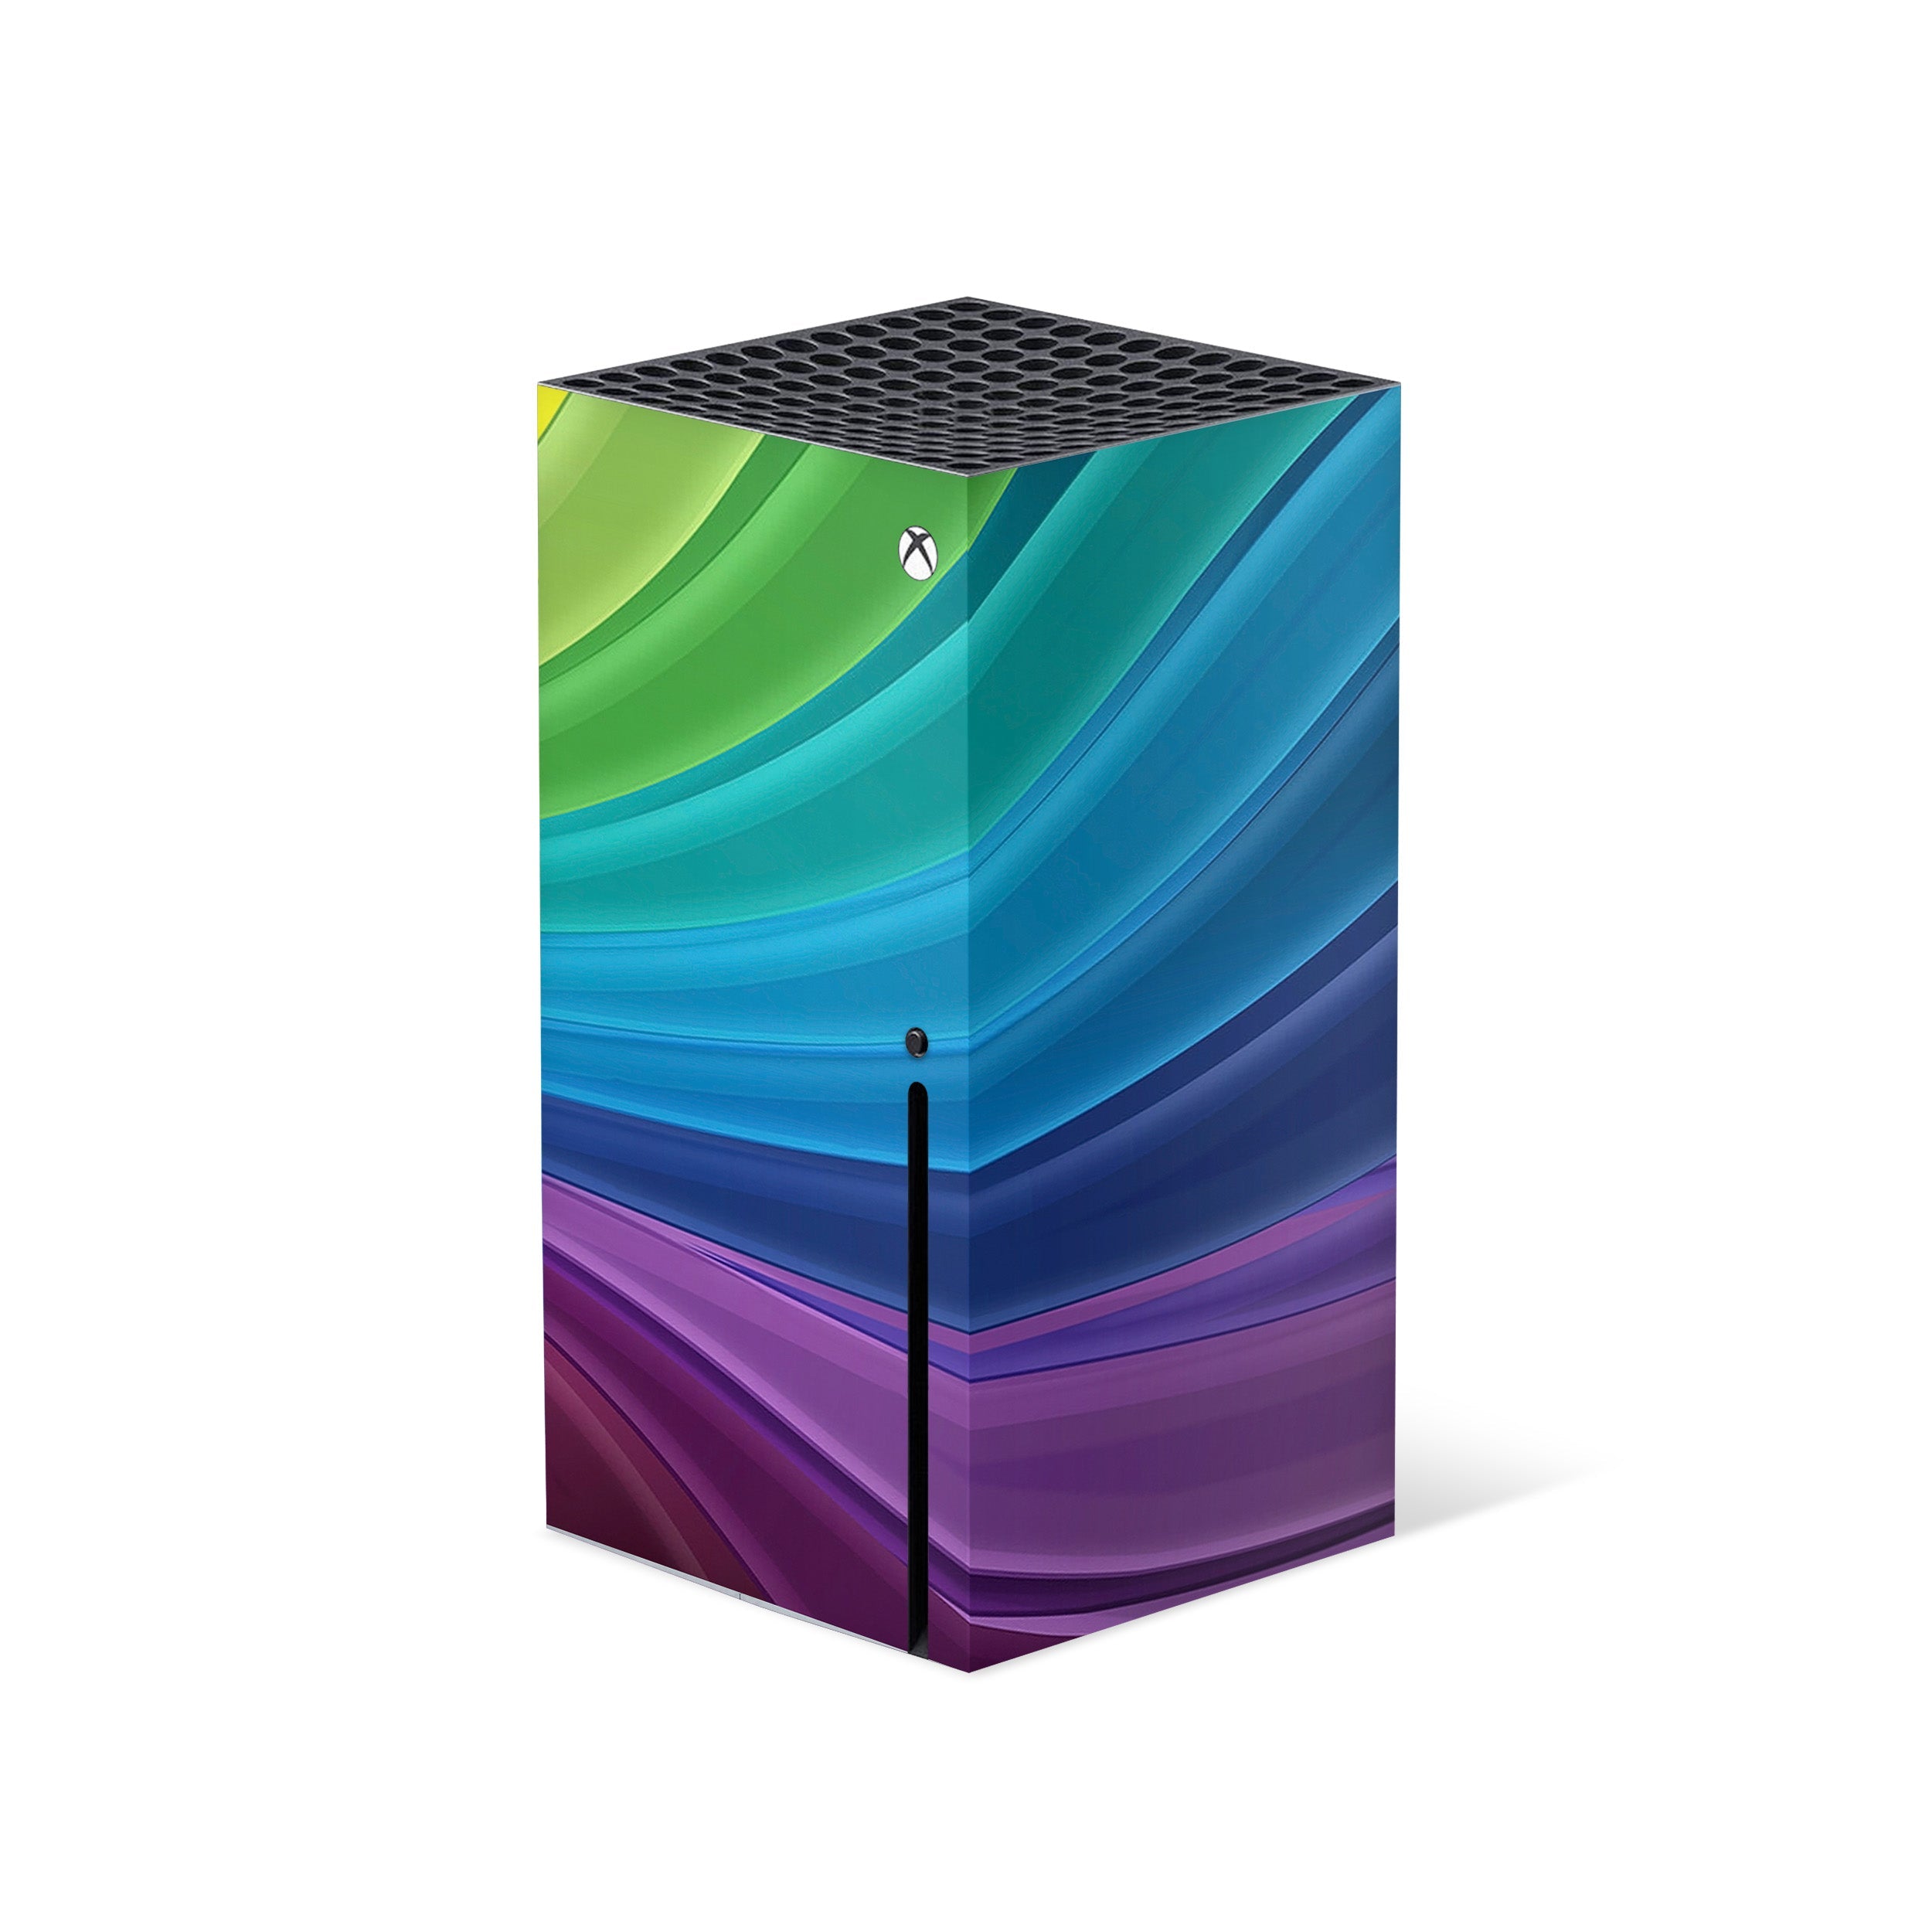 A video game skin featuring a Colorful Rainbow Swirl design for the Xbox Series X.